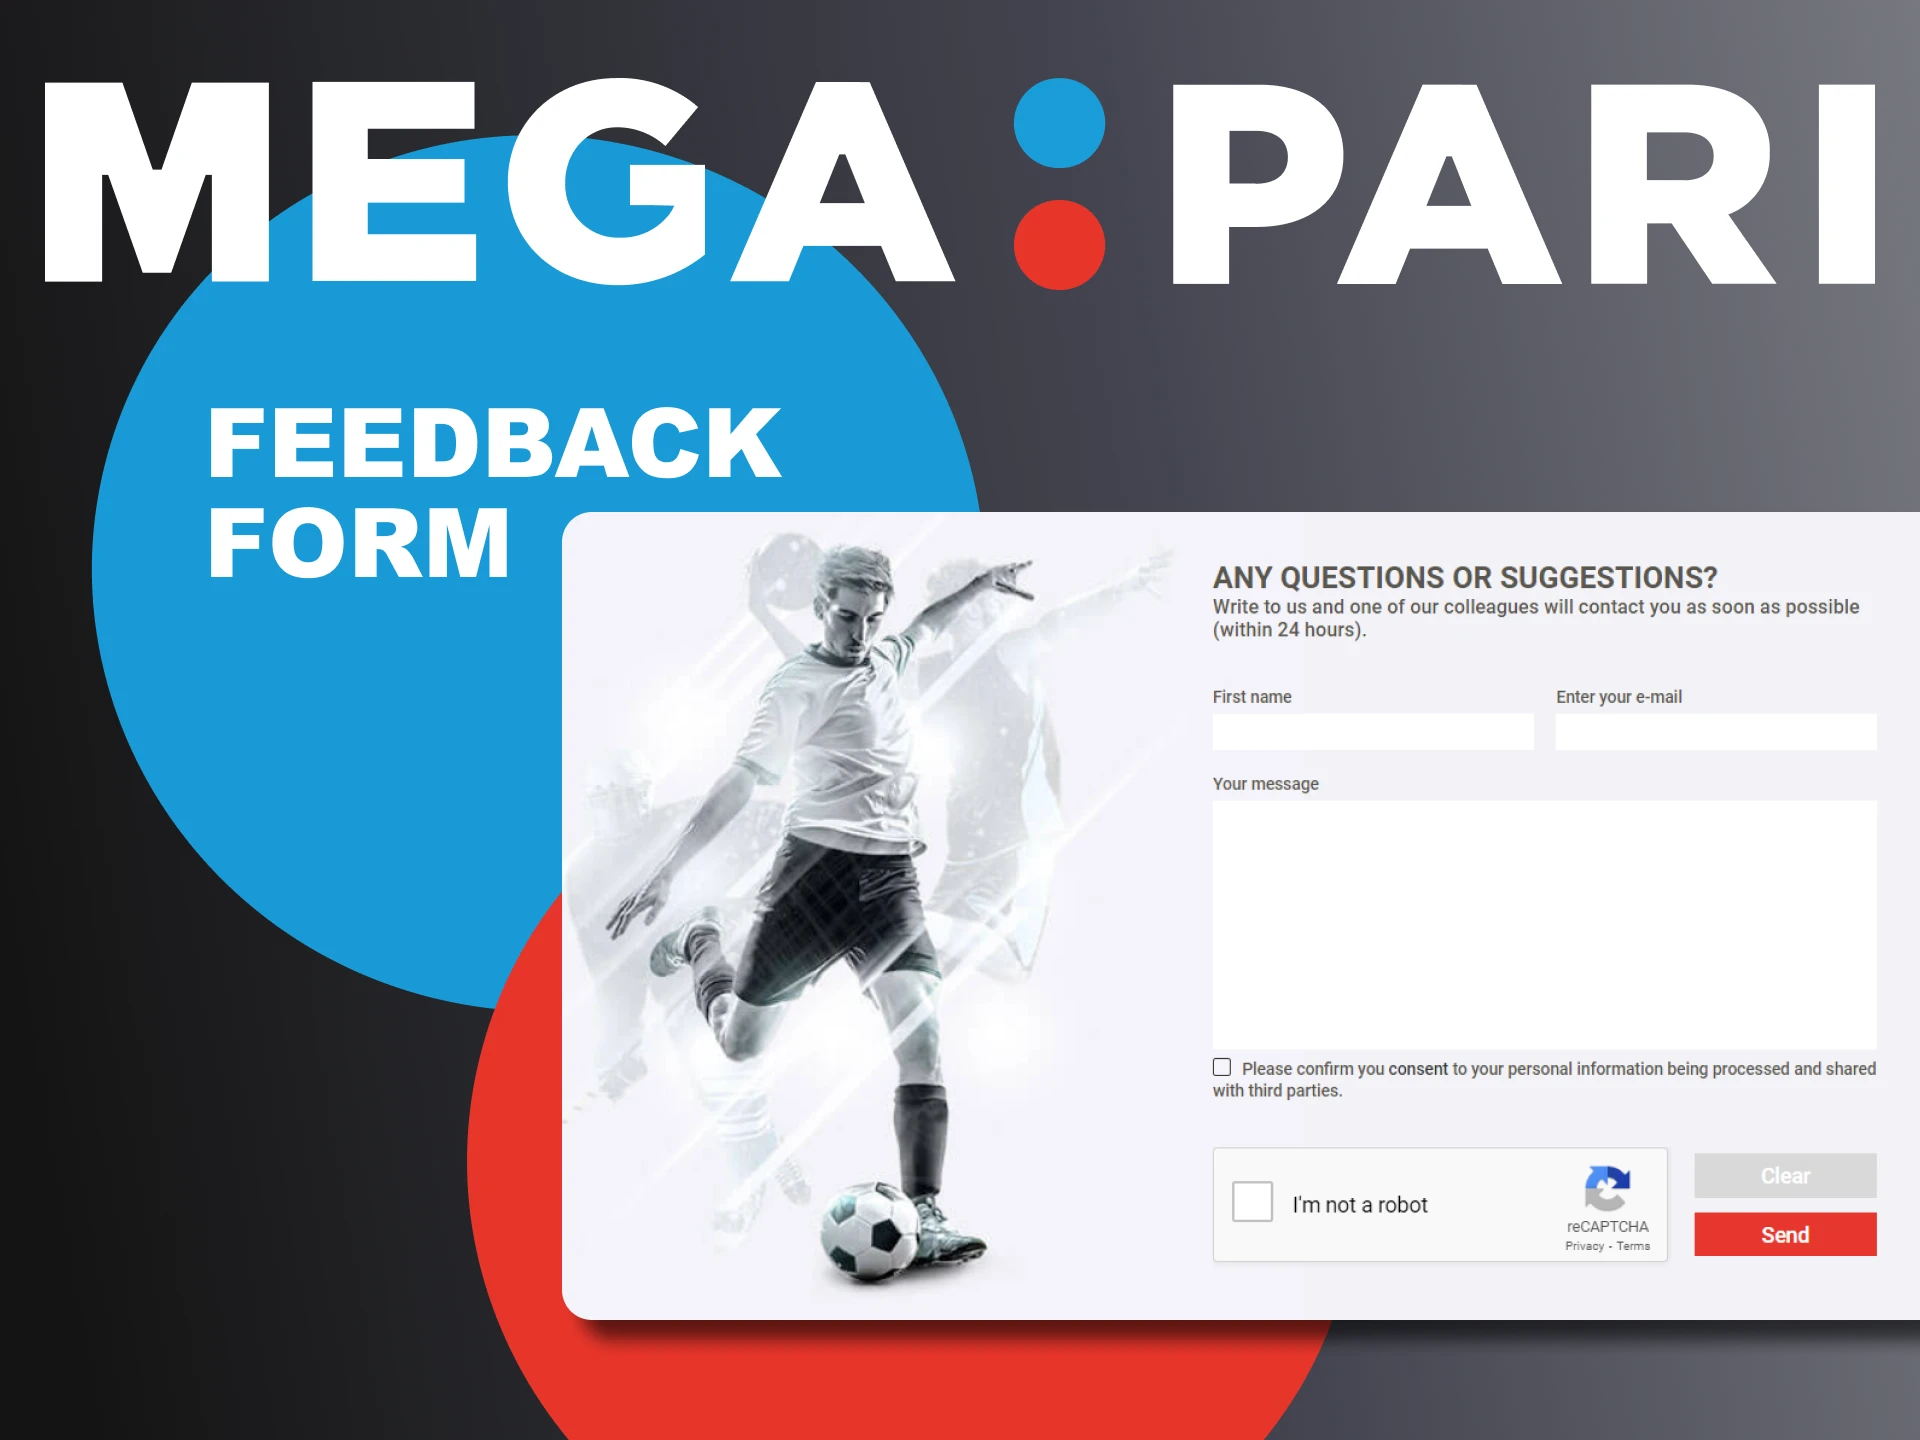 Fill out the feedback form on Megapari, ask questions, and make suggestions.